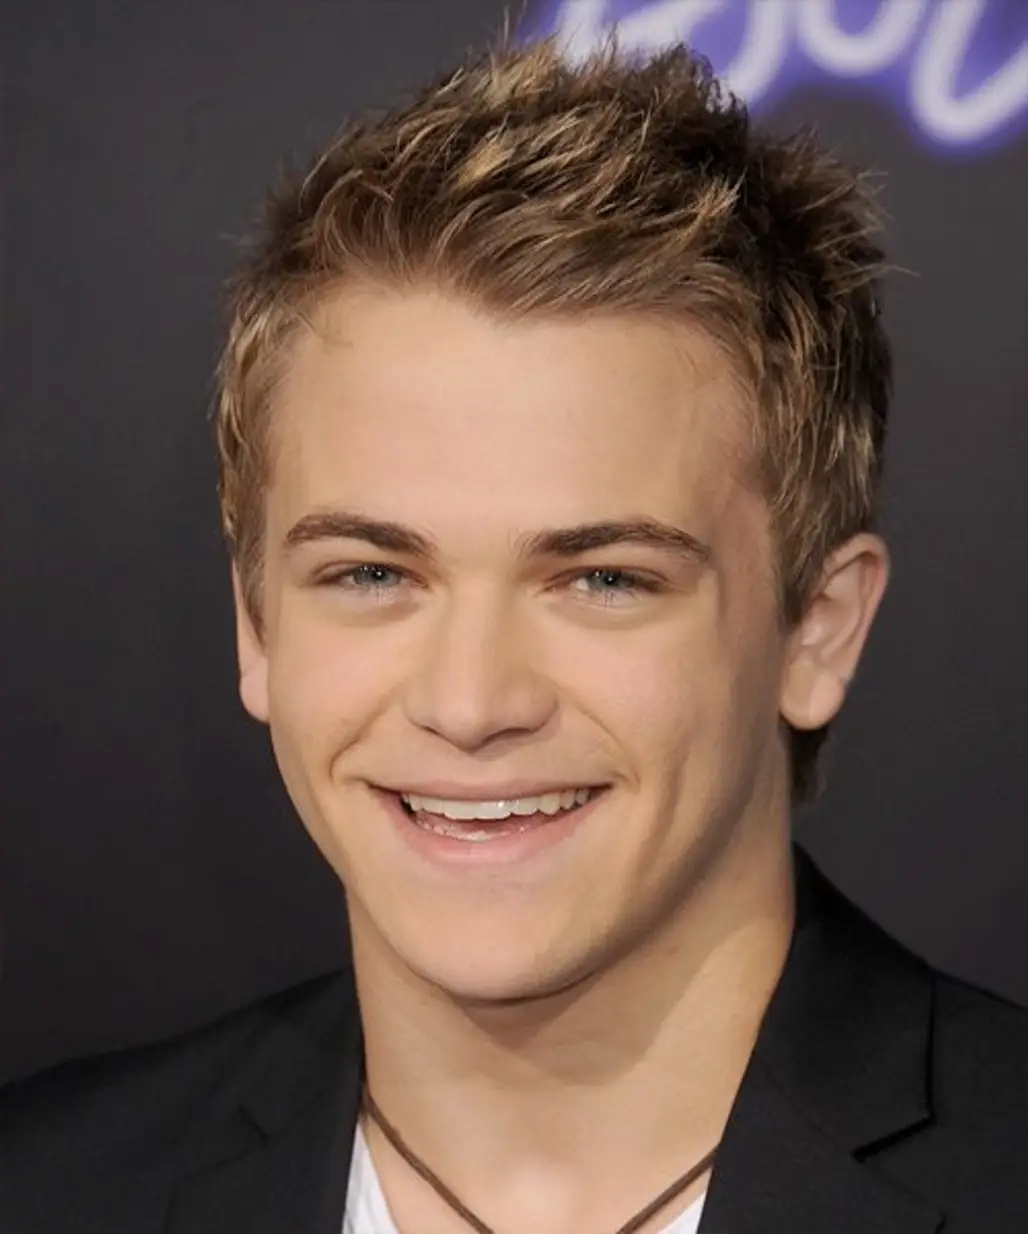 Hunter Hayes - August 22, 2014